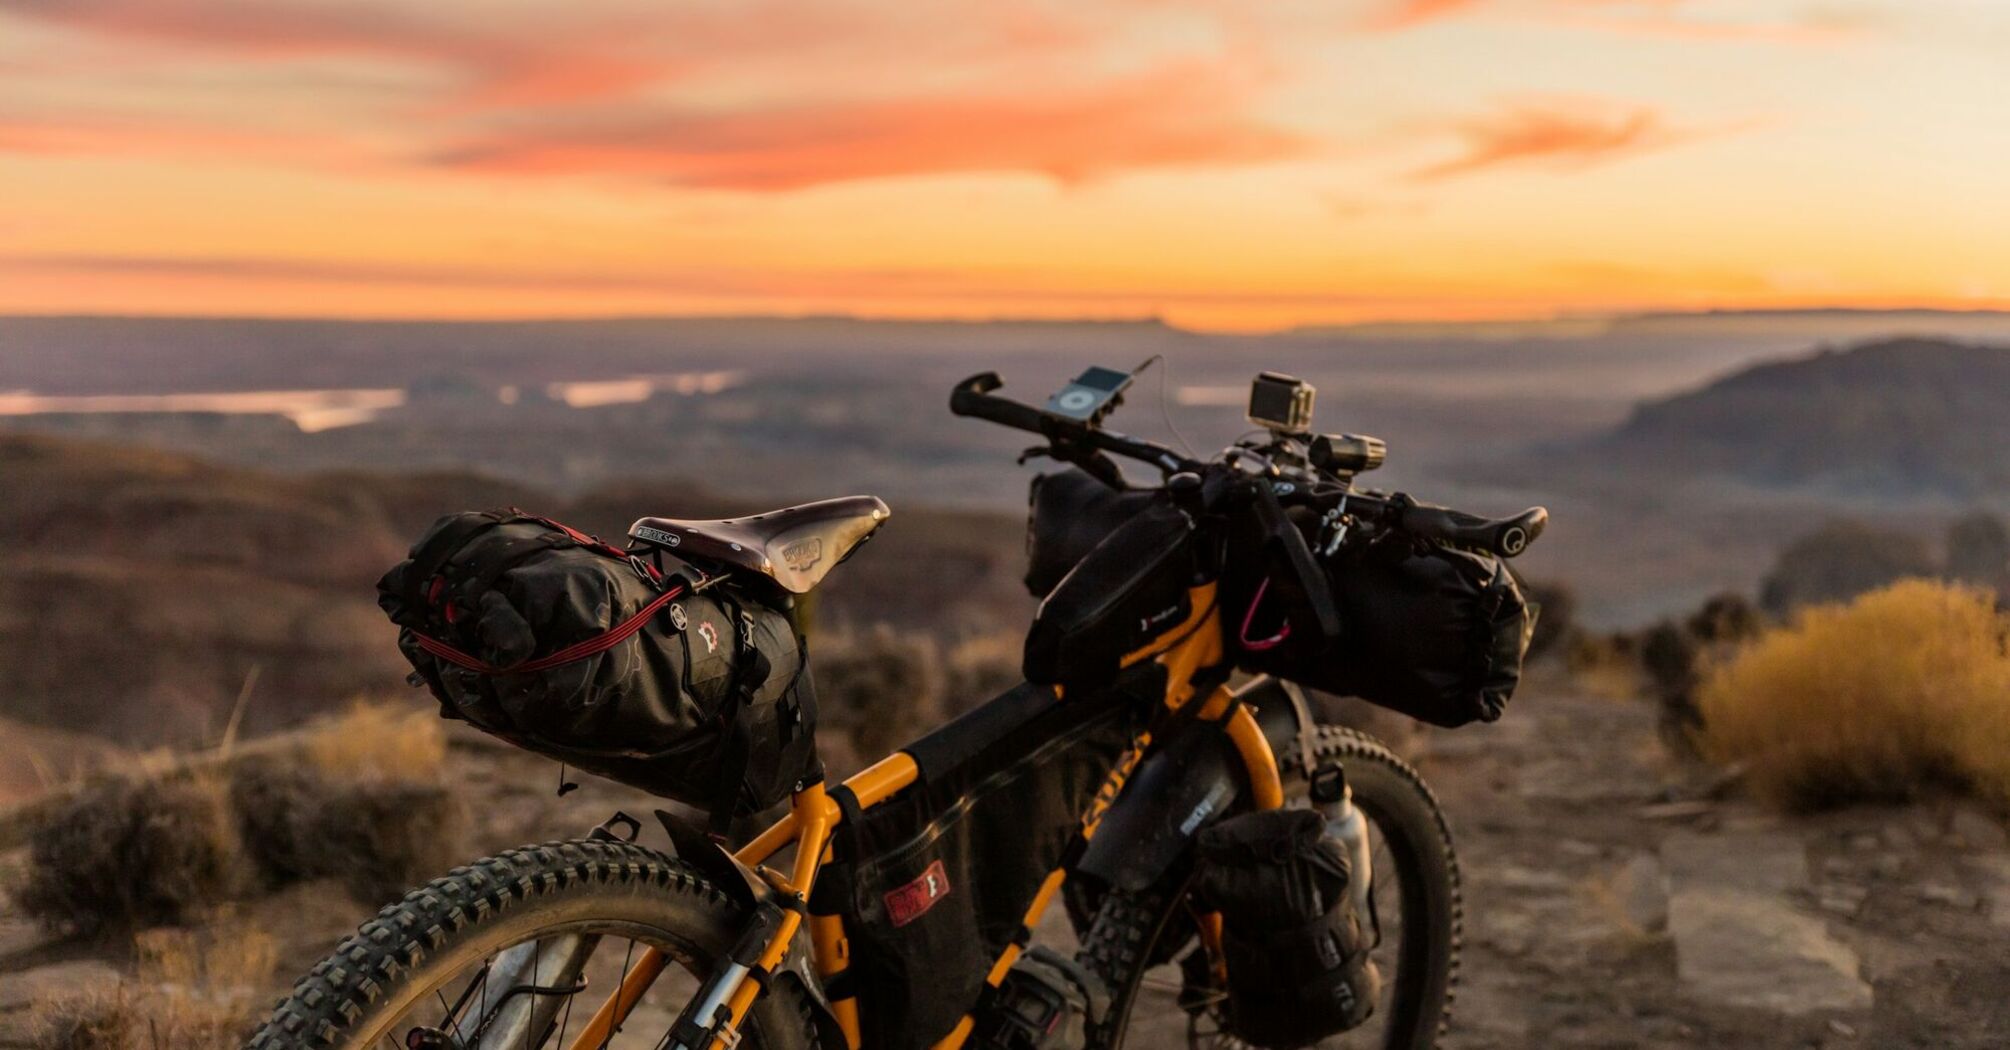 Loaded bicycle with gear at sunset overlooking a scenic landscape